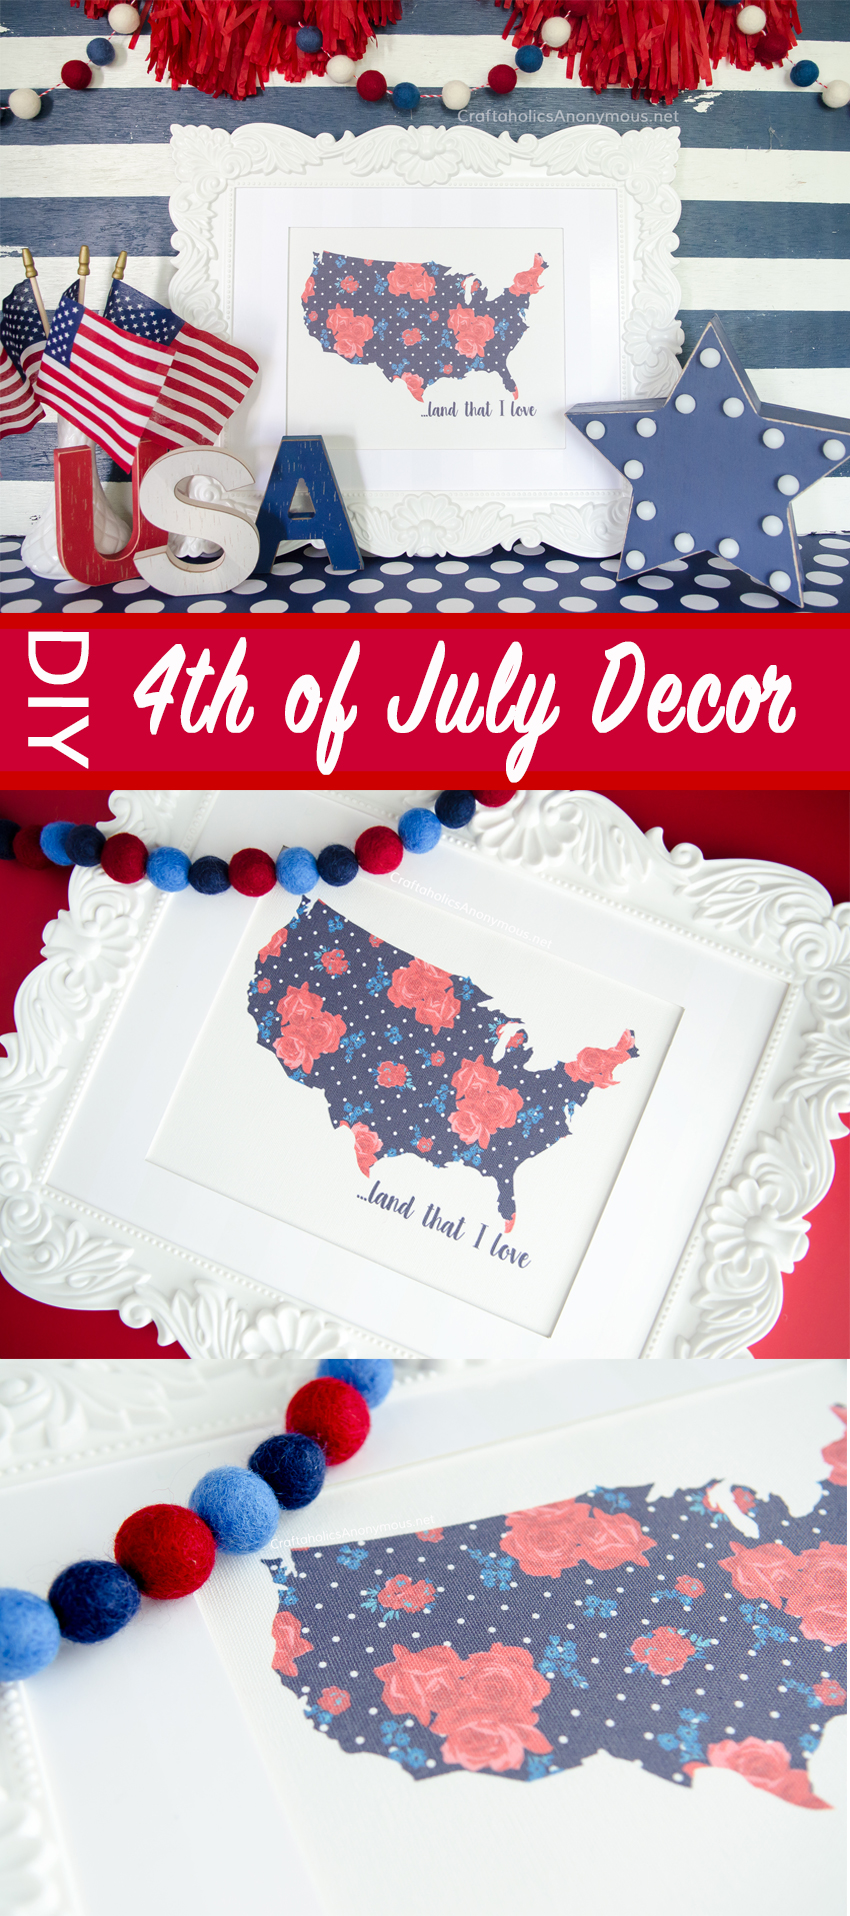 4th of July Decor DIY and crafts